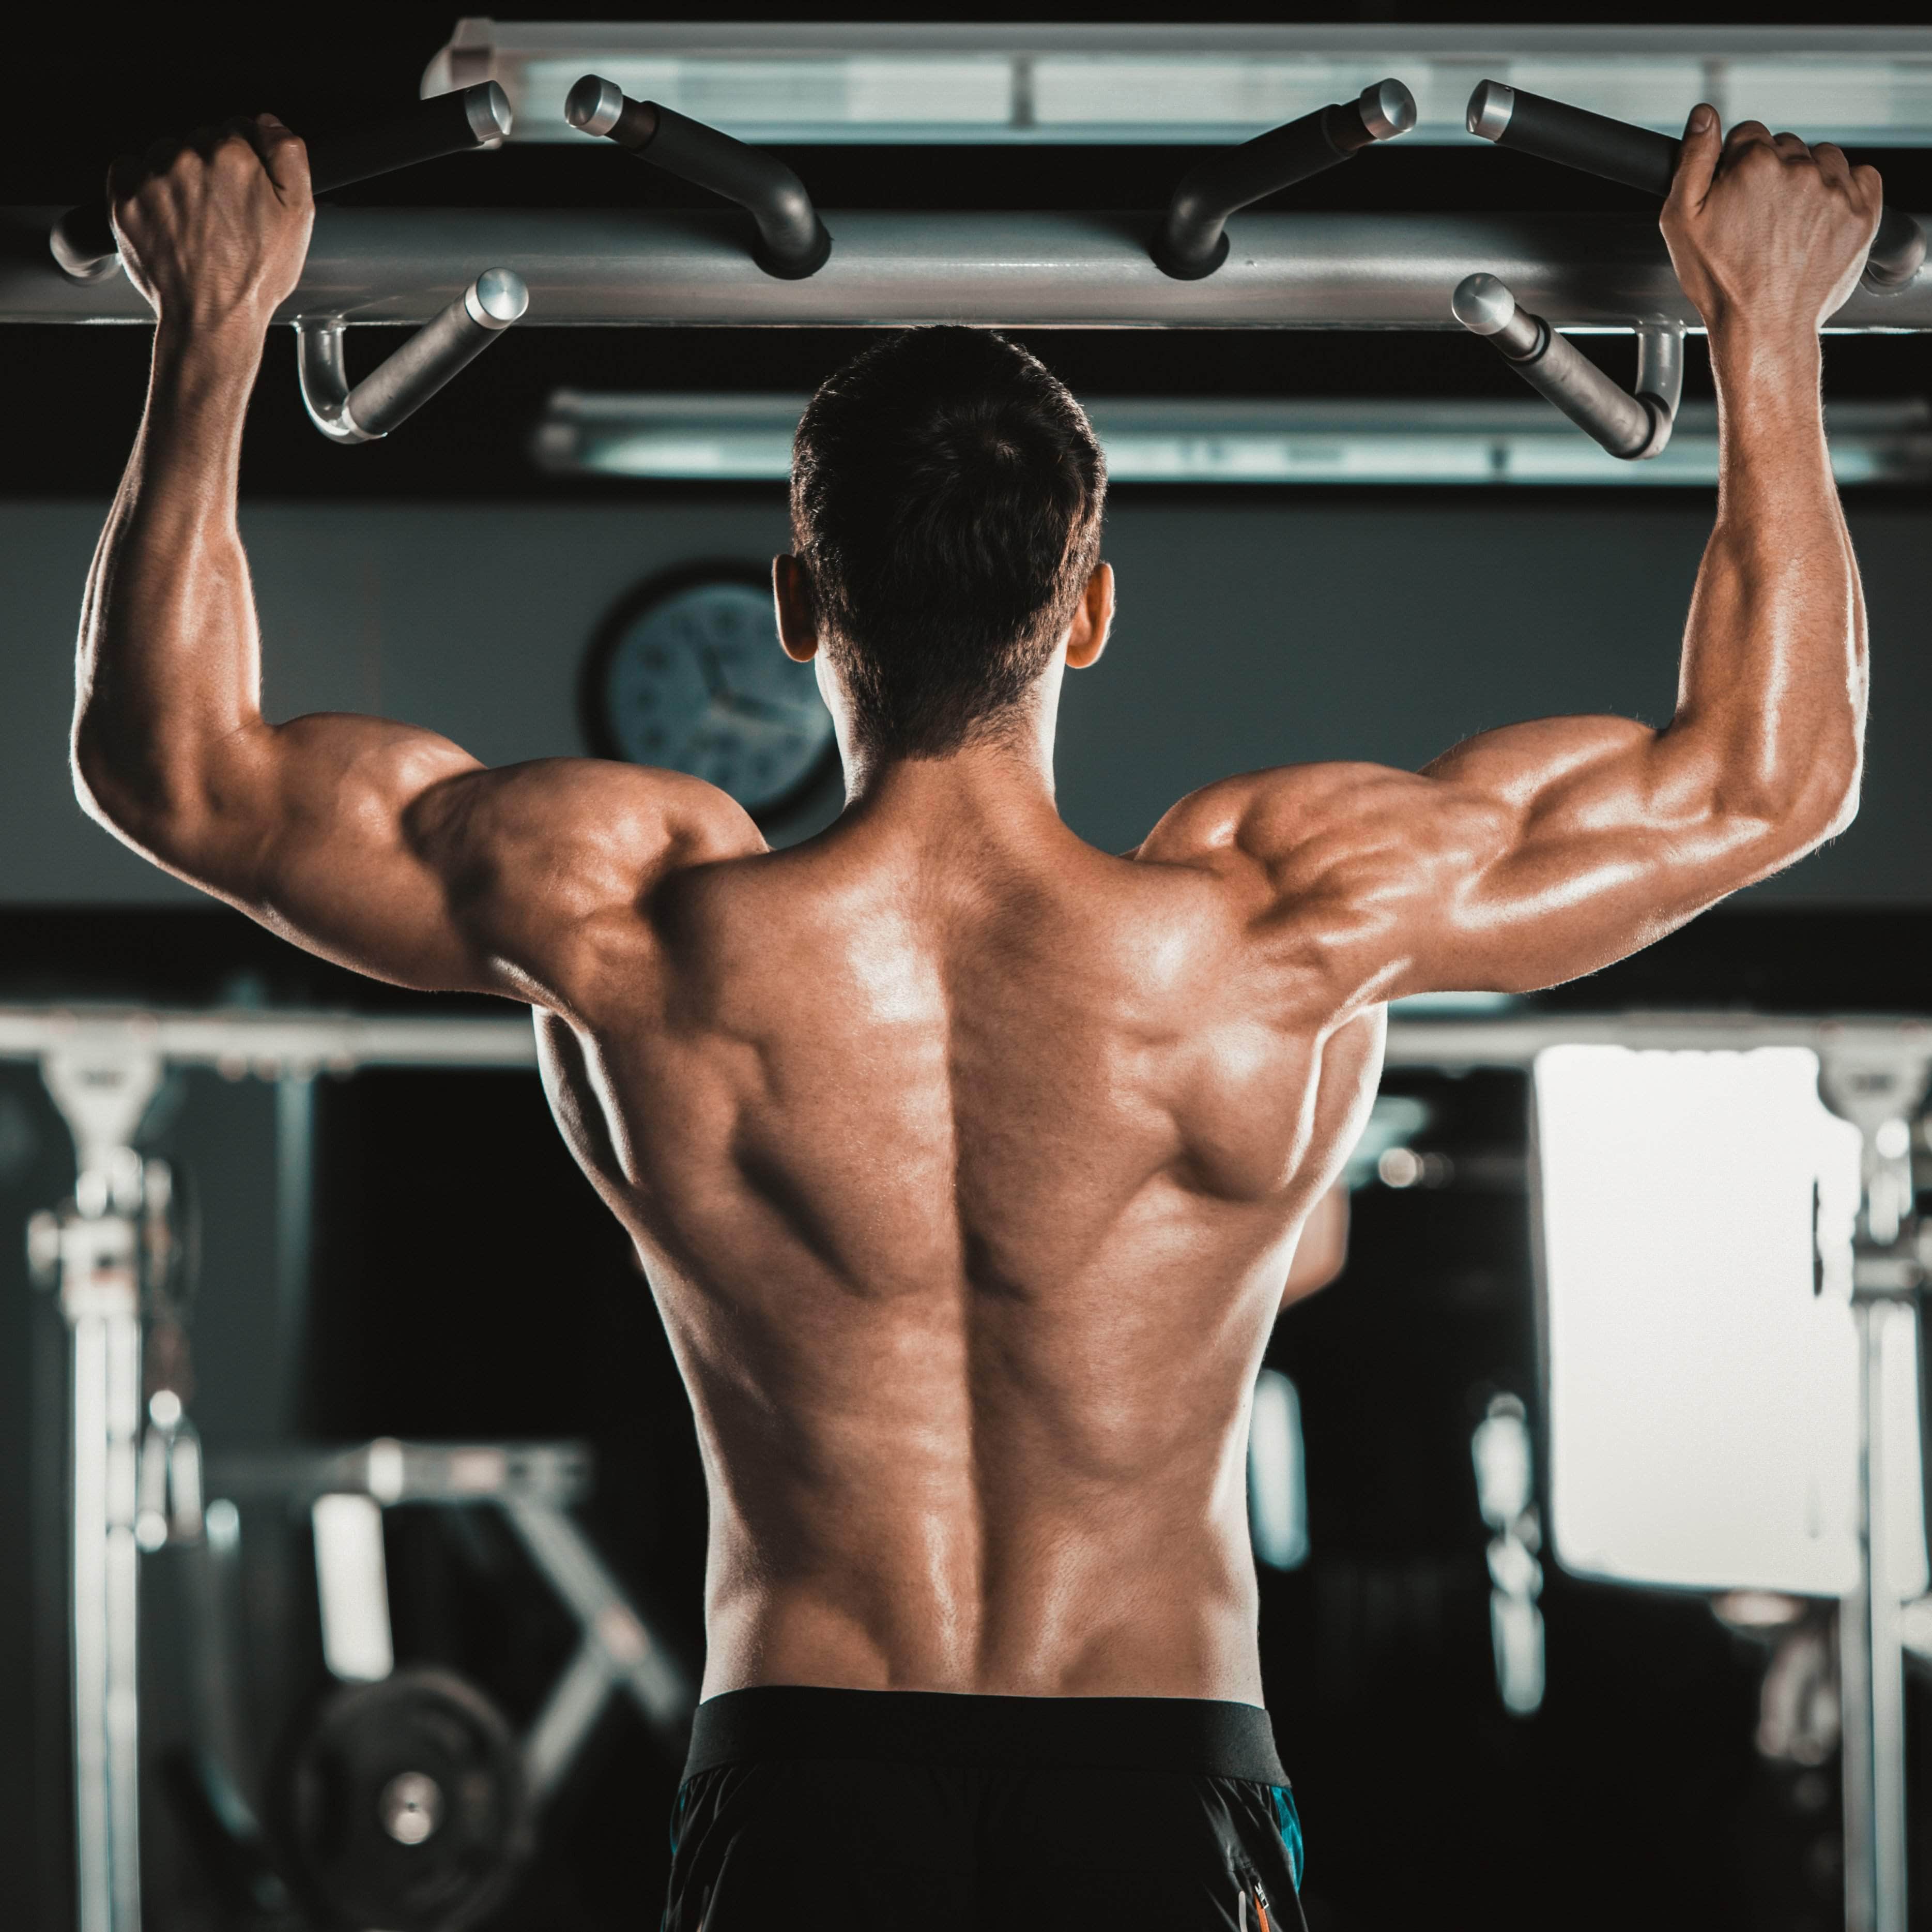 5 Tips For How To Do More Pull-Ups